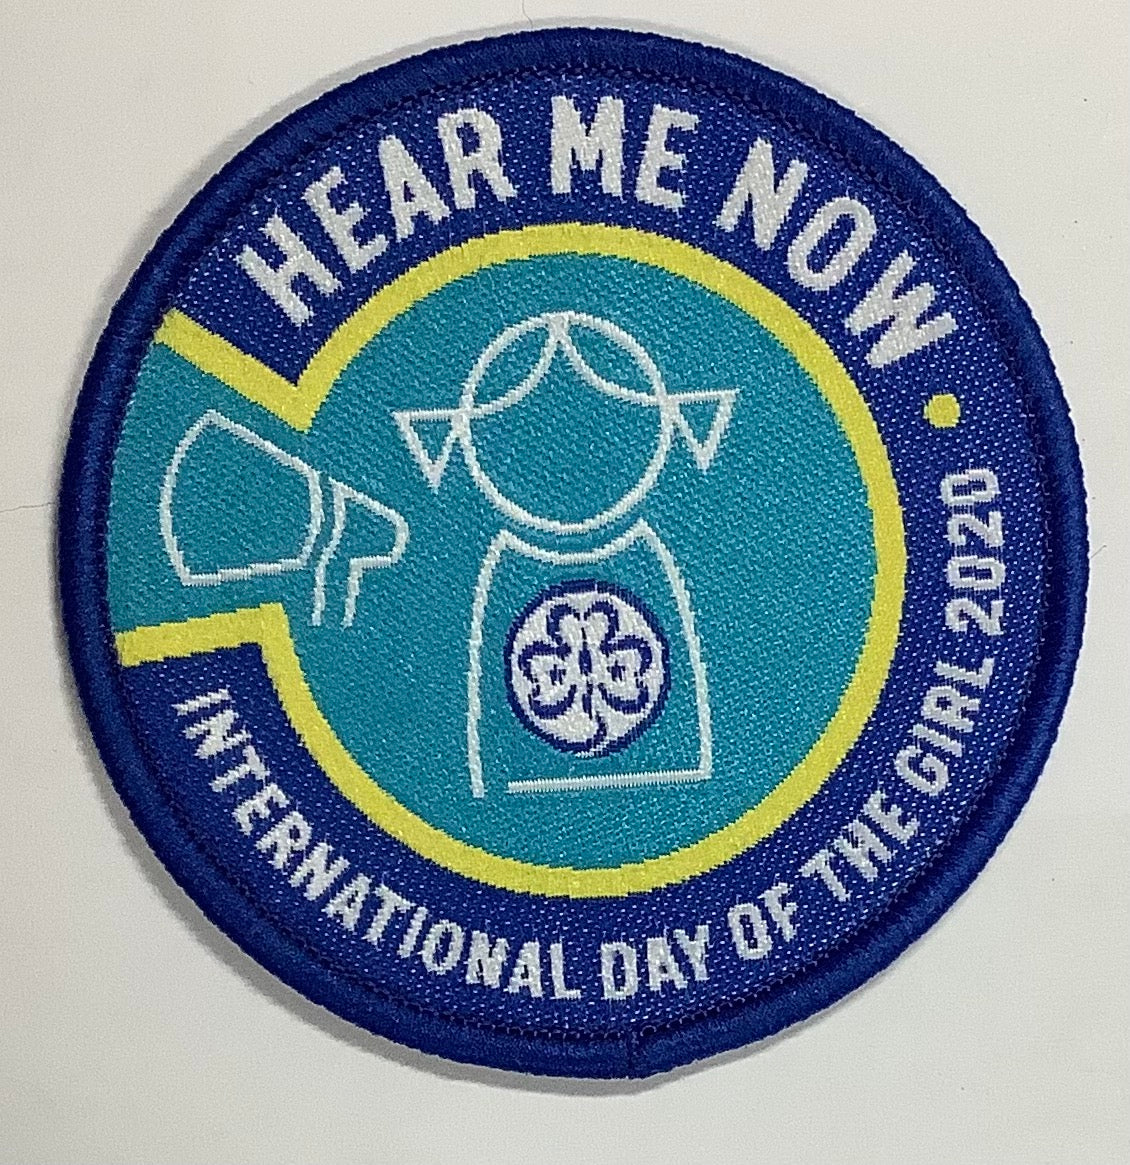 a round badge bound in blue that has a silhouette of a girl and a megaphone on it